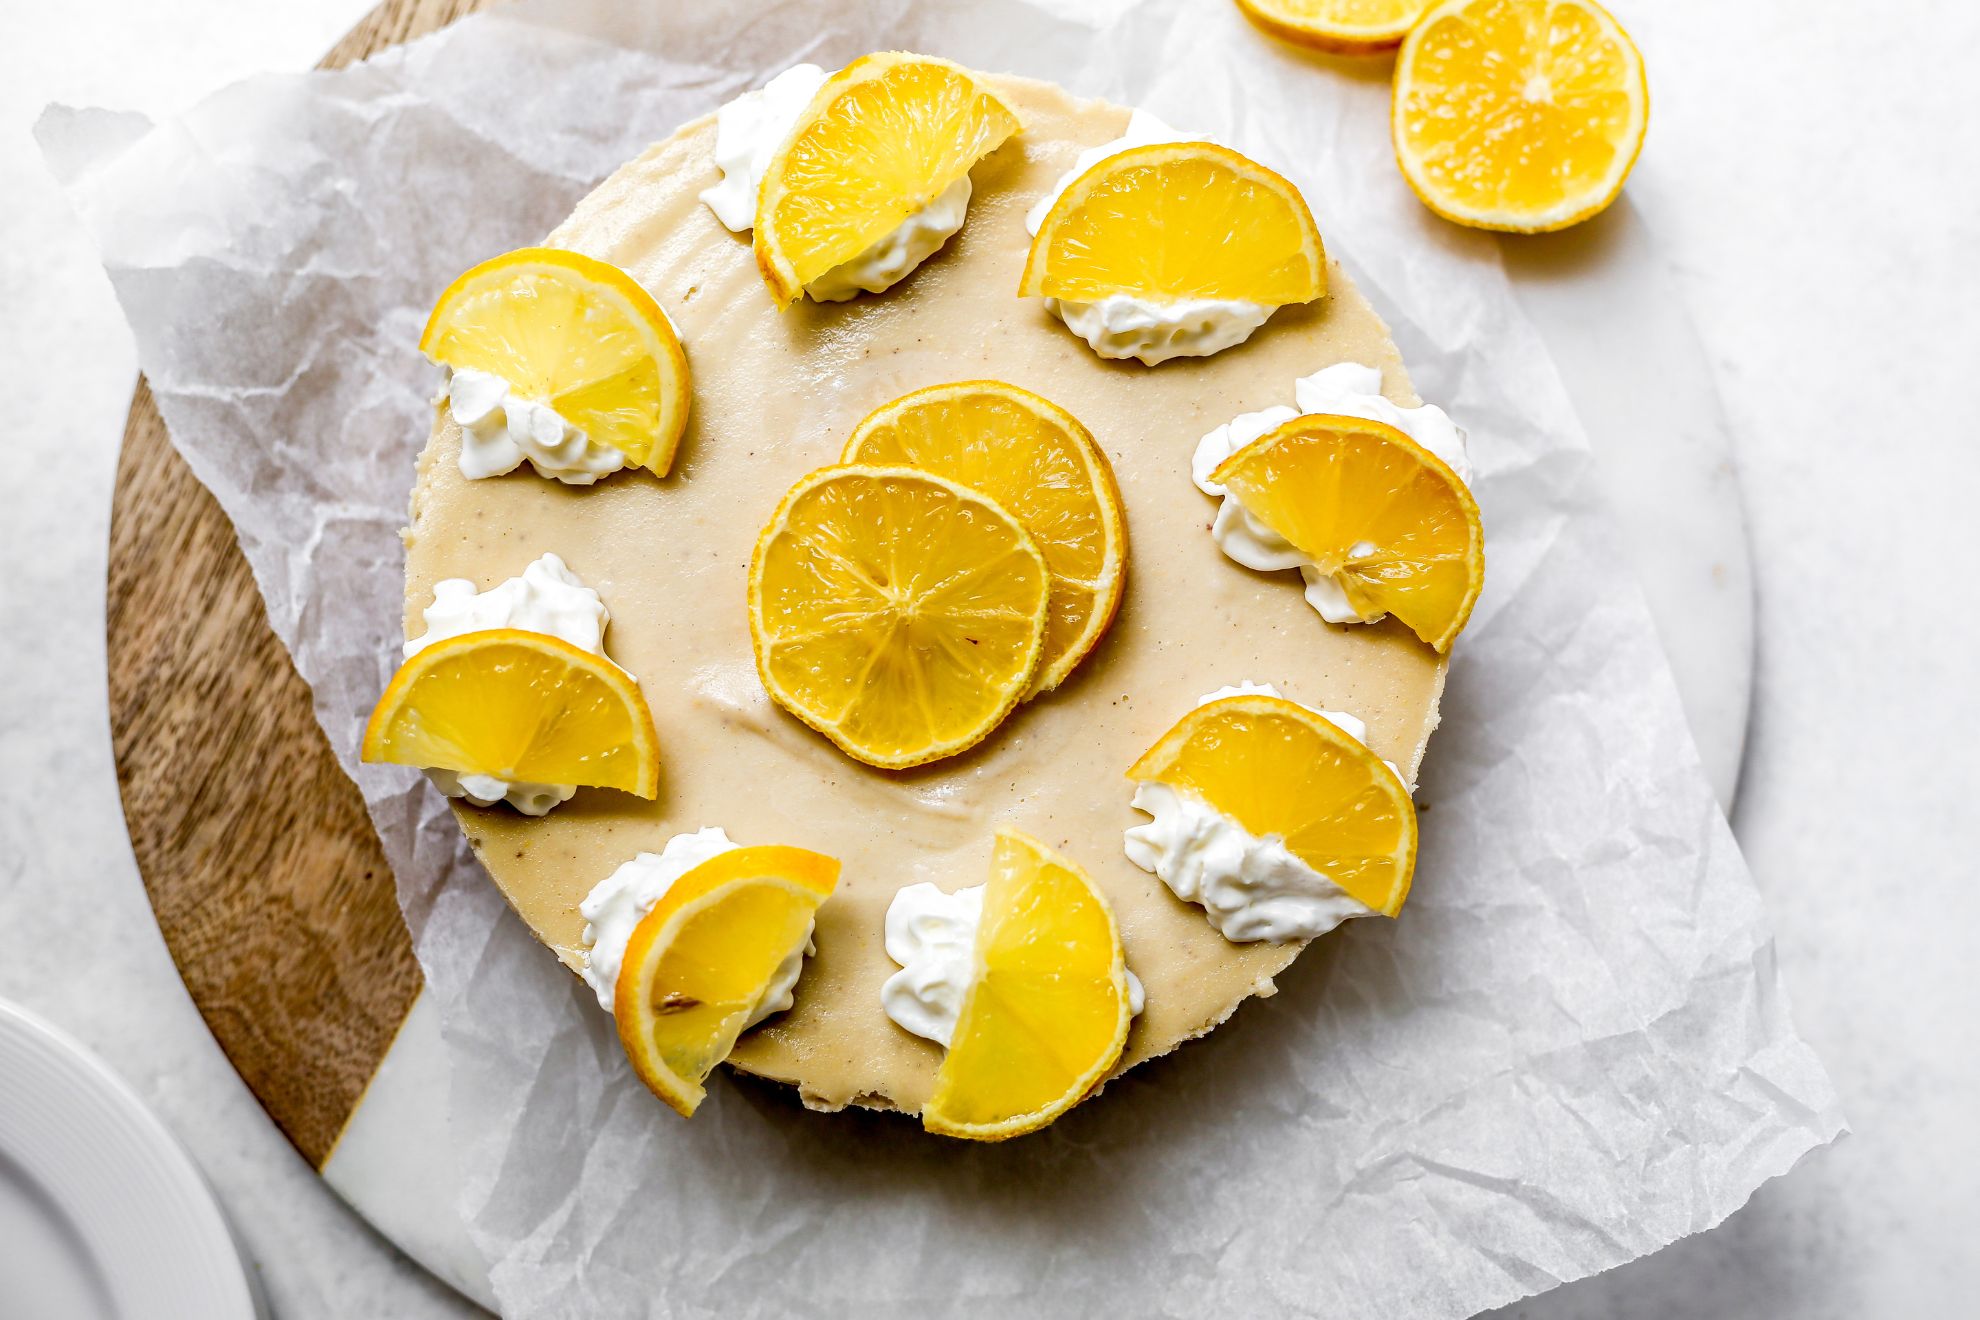 This is an overhead horizontal image of a no bake cheesecake on a piece of white parchment paper on a circular wood and marble cutting board. The cheesecake has dollops of whipped cream and lemon slices around the edge and two slices of lemon in the center. More lemon slices are next to the cheesecake to the top right, sitting on the cutting board. The cutting board sits on a white surface and a white plate is peaking into from from the bottom left corner.